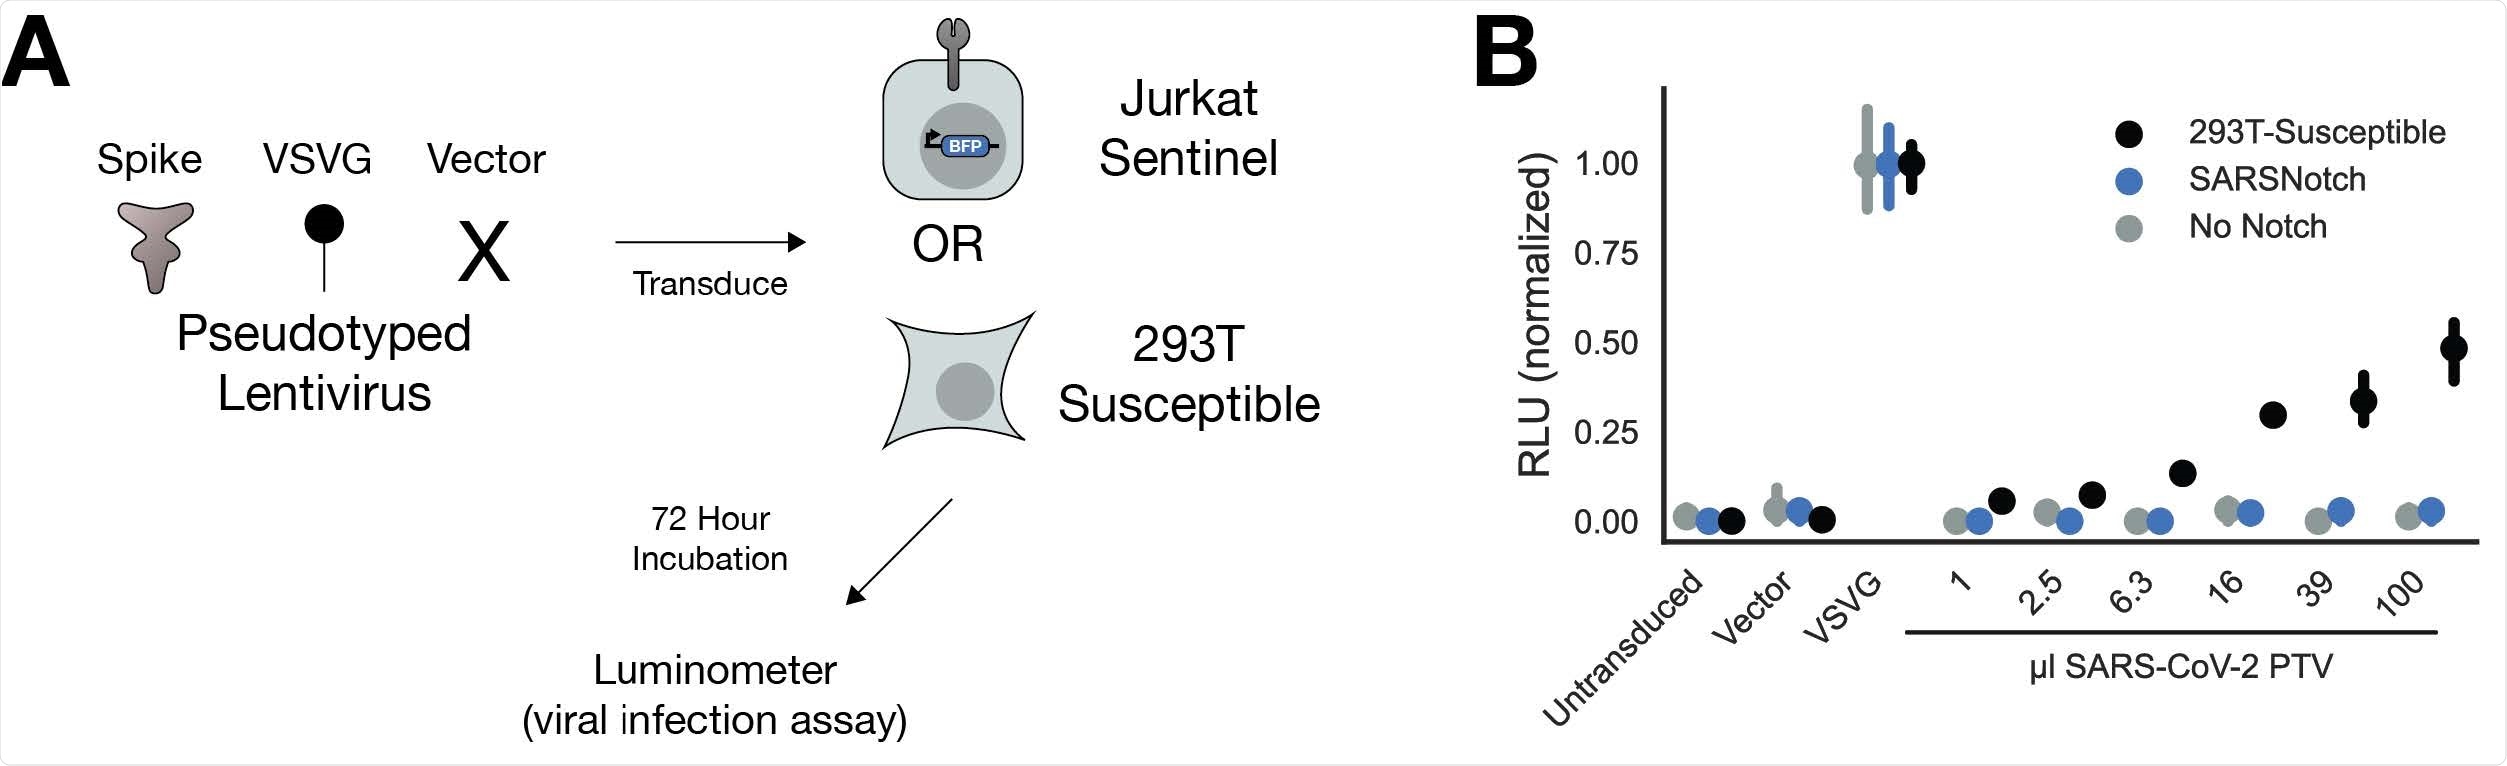 SARSNotch does not increase susceptibility to viral infection. A) Experimental schematic, showing that 3 different Luciferase-encoding pseudotyped virus variants were applied to either Jurkat sentinel cells or ACE2 and TMPRSS2- expressing HEK293T cells (293T-Susceptible), which were then assessed for SARSNotch activation and luciferase expression. B) Luciferase activity, normalized within each cell line to the maximum fluorescence from the VSVG infection, as a function of which pseudovirus was applied. Data points and error bars represent mean and 95% confidence interval of 3 biological replicates.